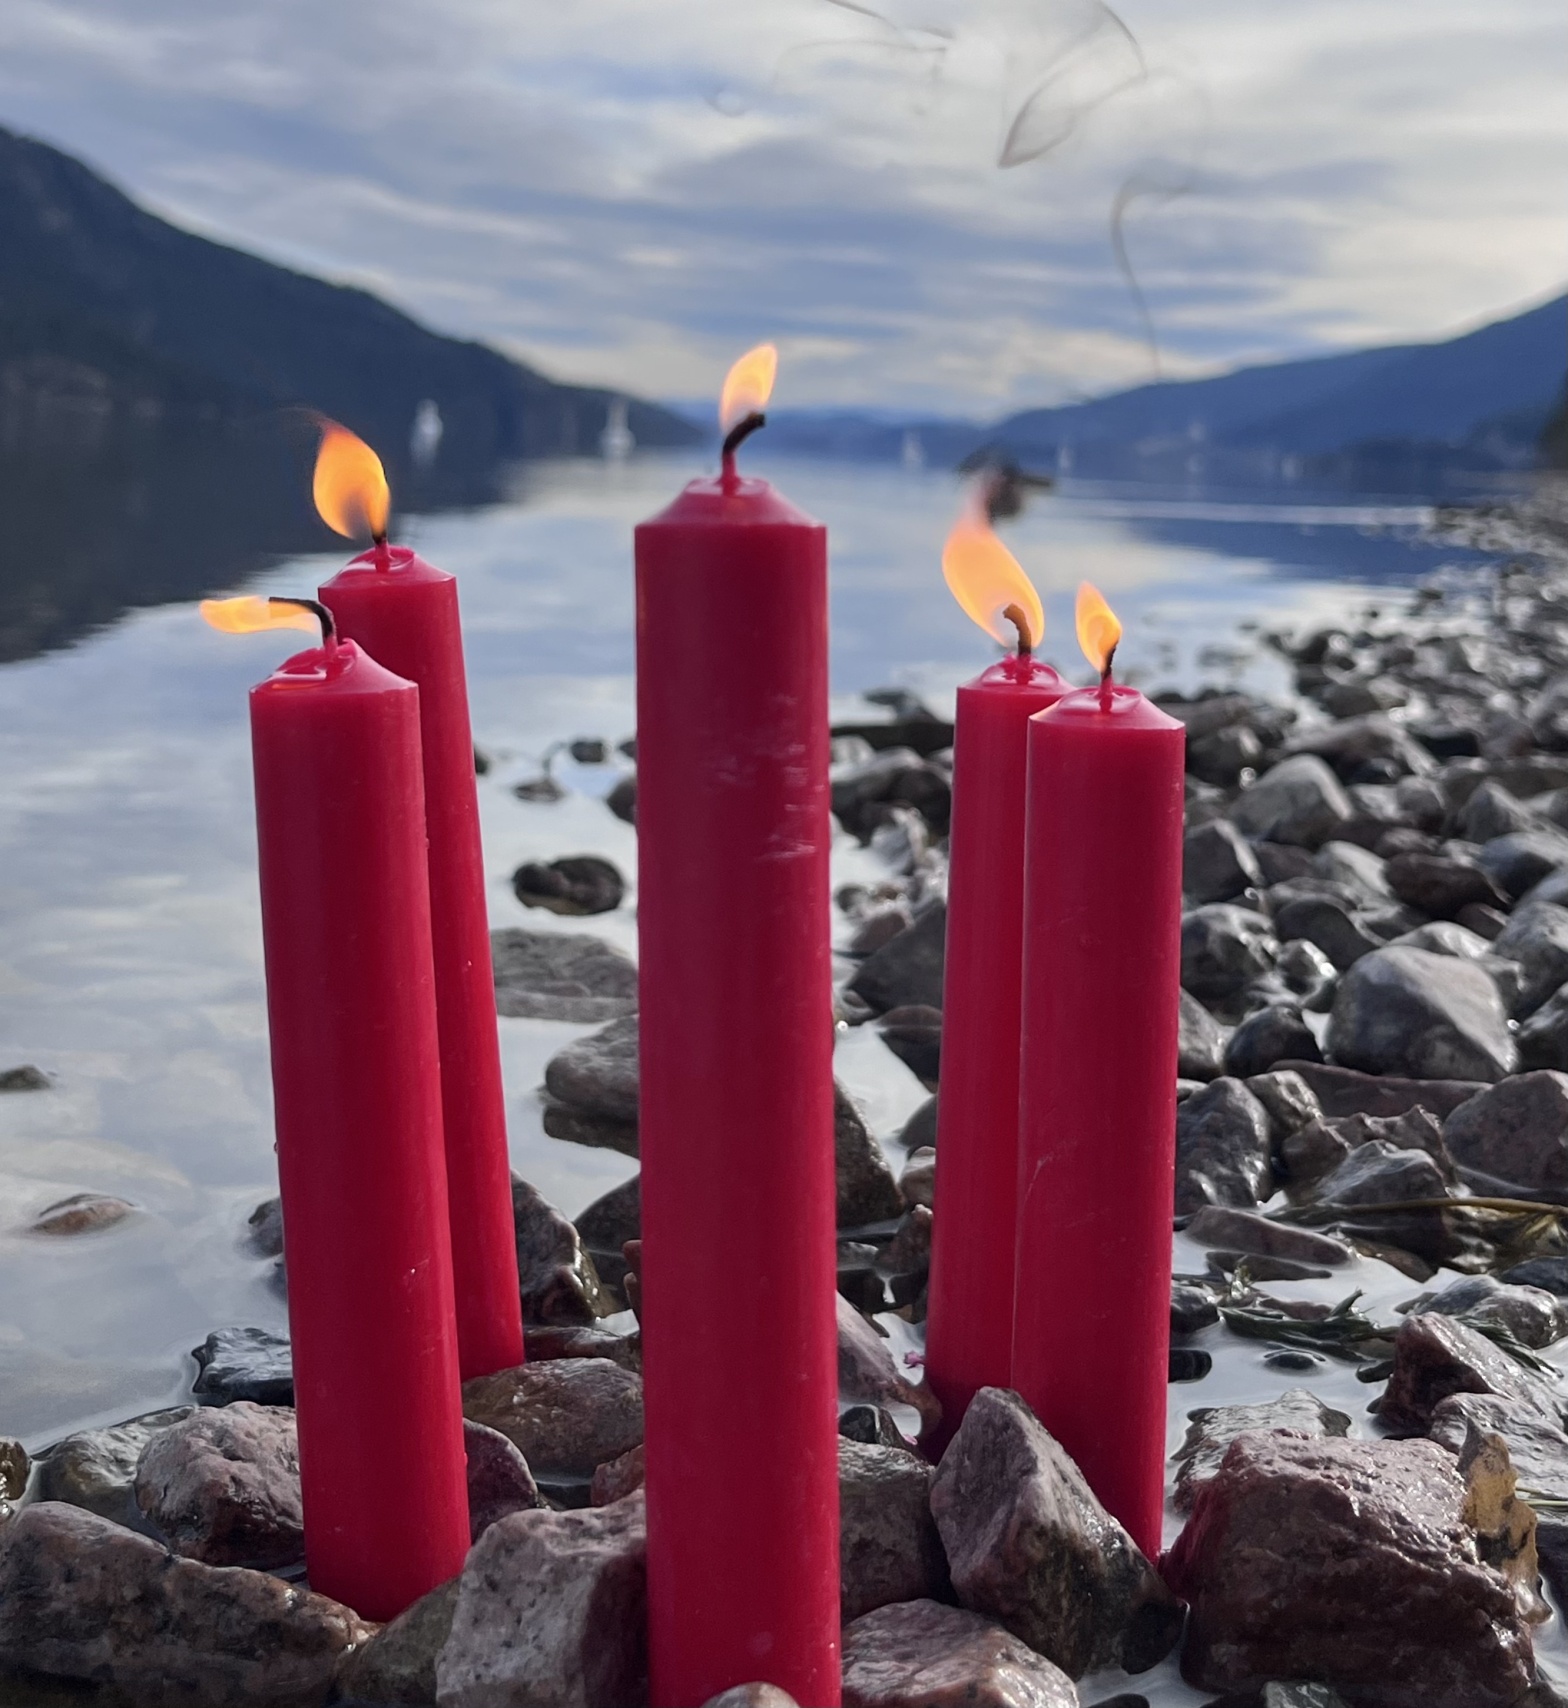 the flames from five lit red candles flicker, against a backdrop of rocks and water